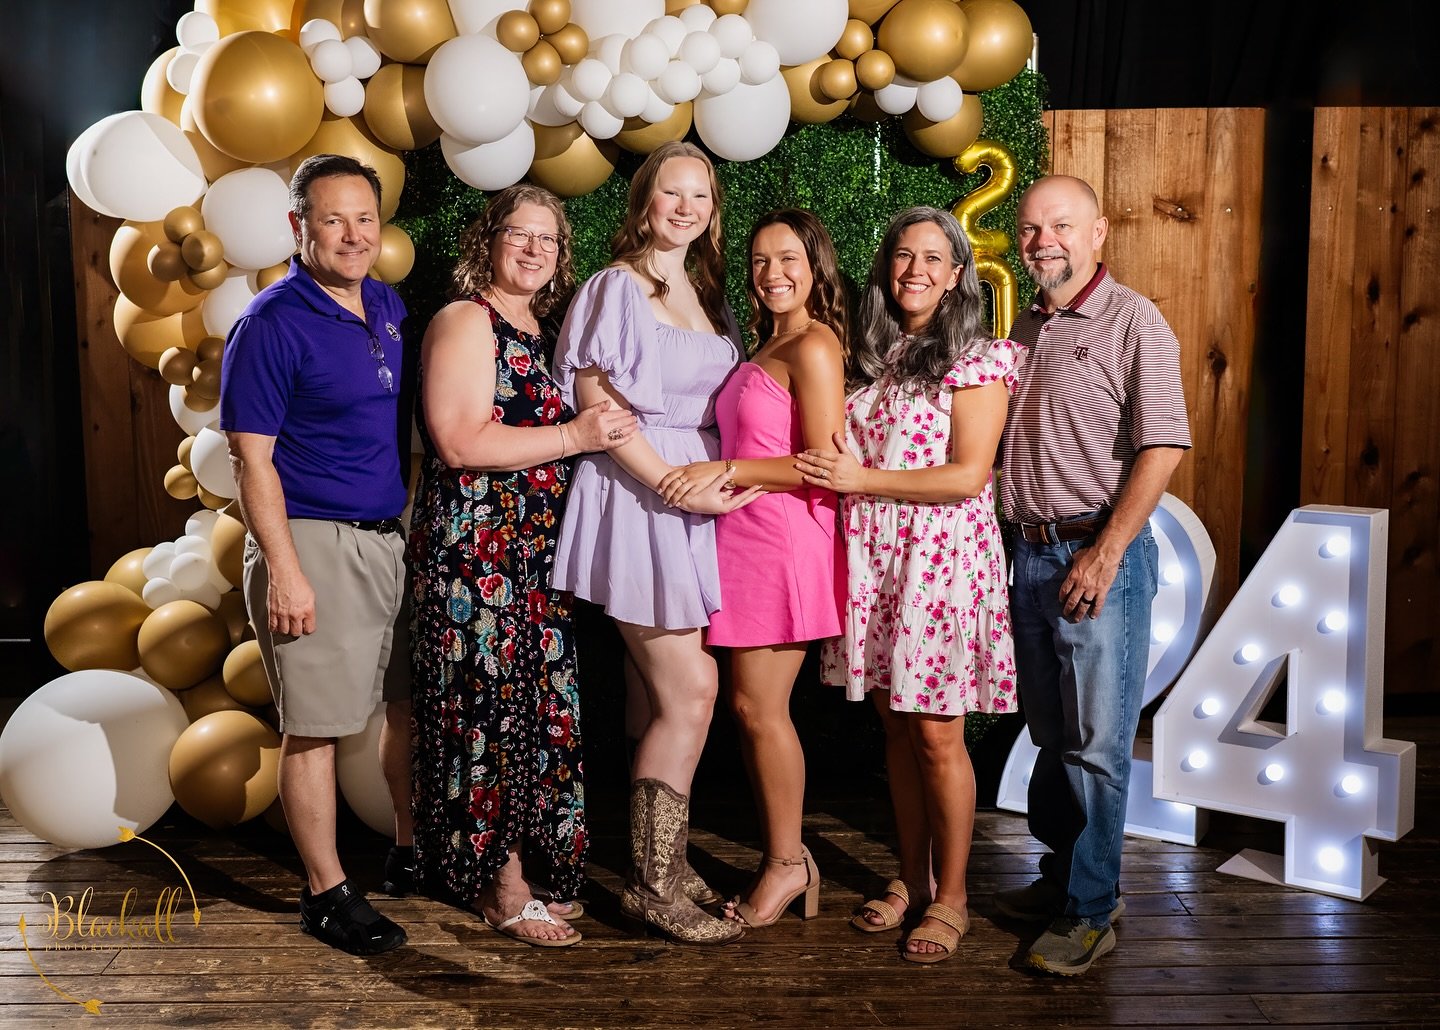 SUPER fun night celebrating these two grads 🎓 with their family and several hundred of their closest friends at @martybsplace!! It&rsquo;s was an amazing party!!!
✌🏻💛📸
&zwnj;
&zwnj;
&copy;️Blackall Photography 2024
#BLACKALLPHOTOGRAPHY
#TexasThro